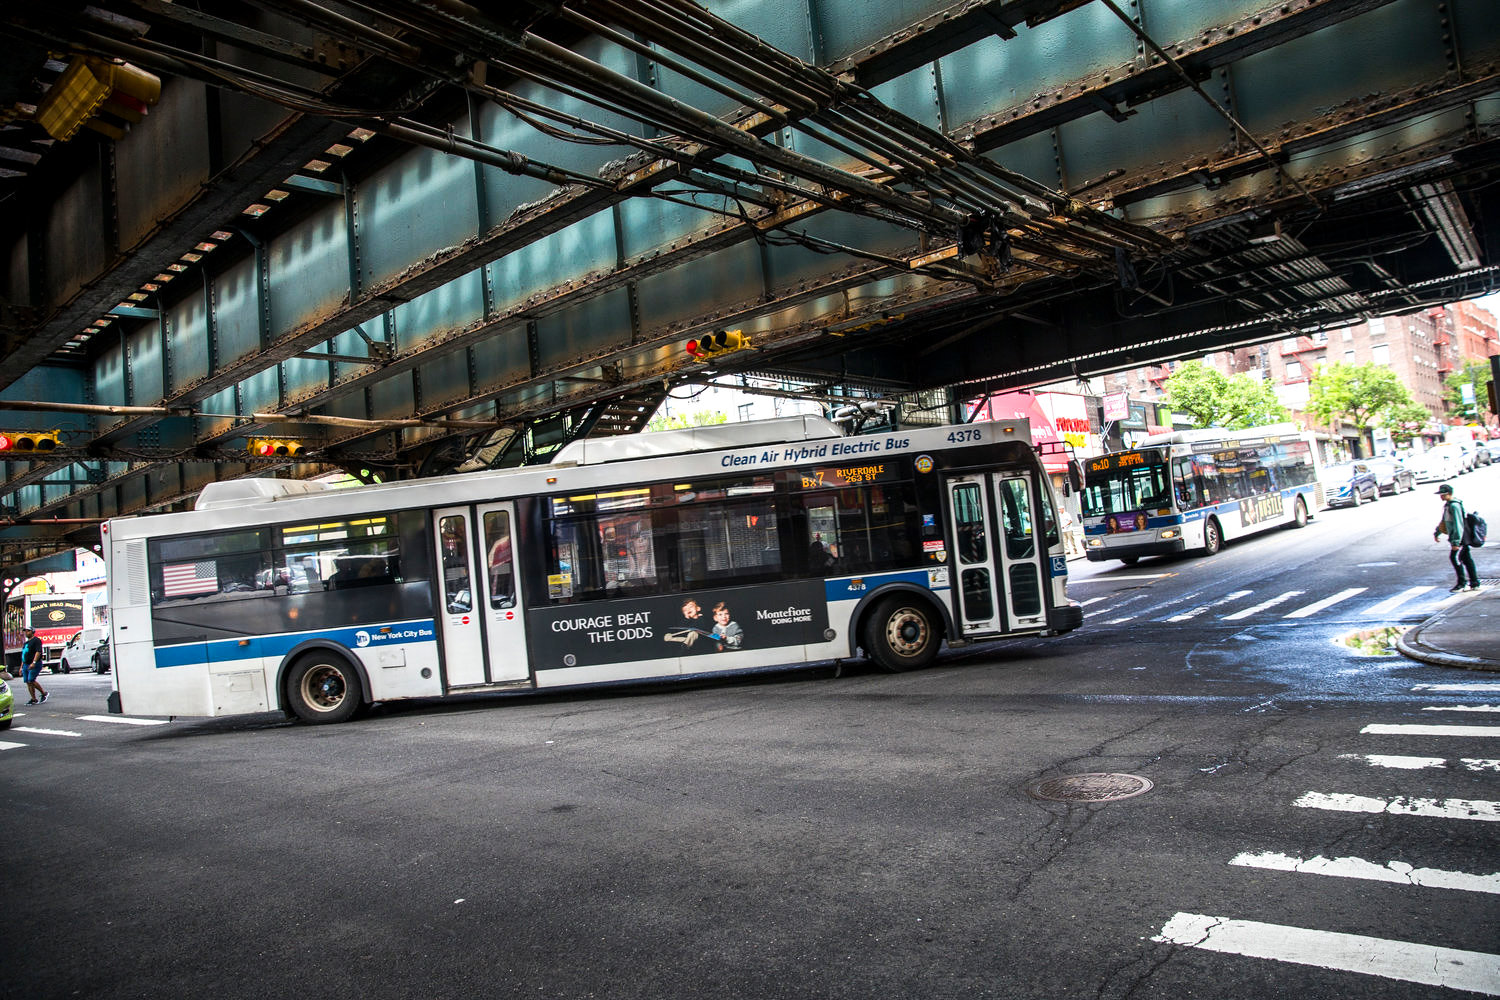 For the past four years, the Metropolitan Transportation Authority has promised to simplify its local and express bus systems. While the Bx7 is not expected to see any major changes, commuters expressed the need for improved bus frequency — and less crowding.